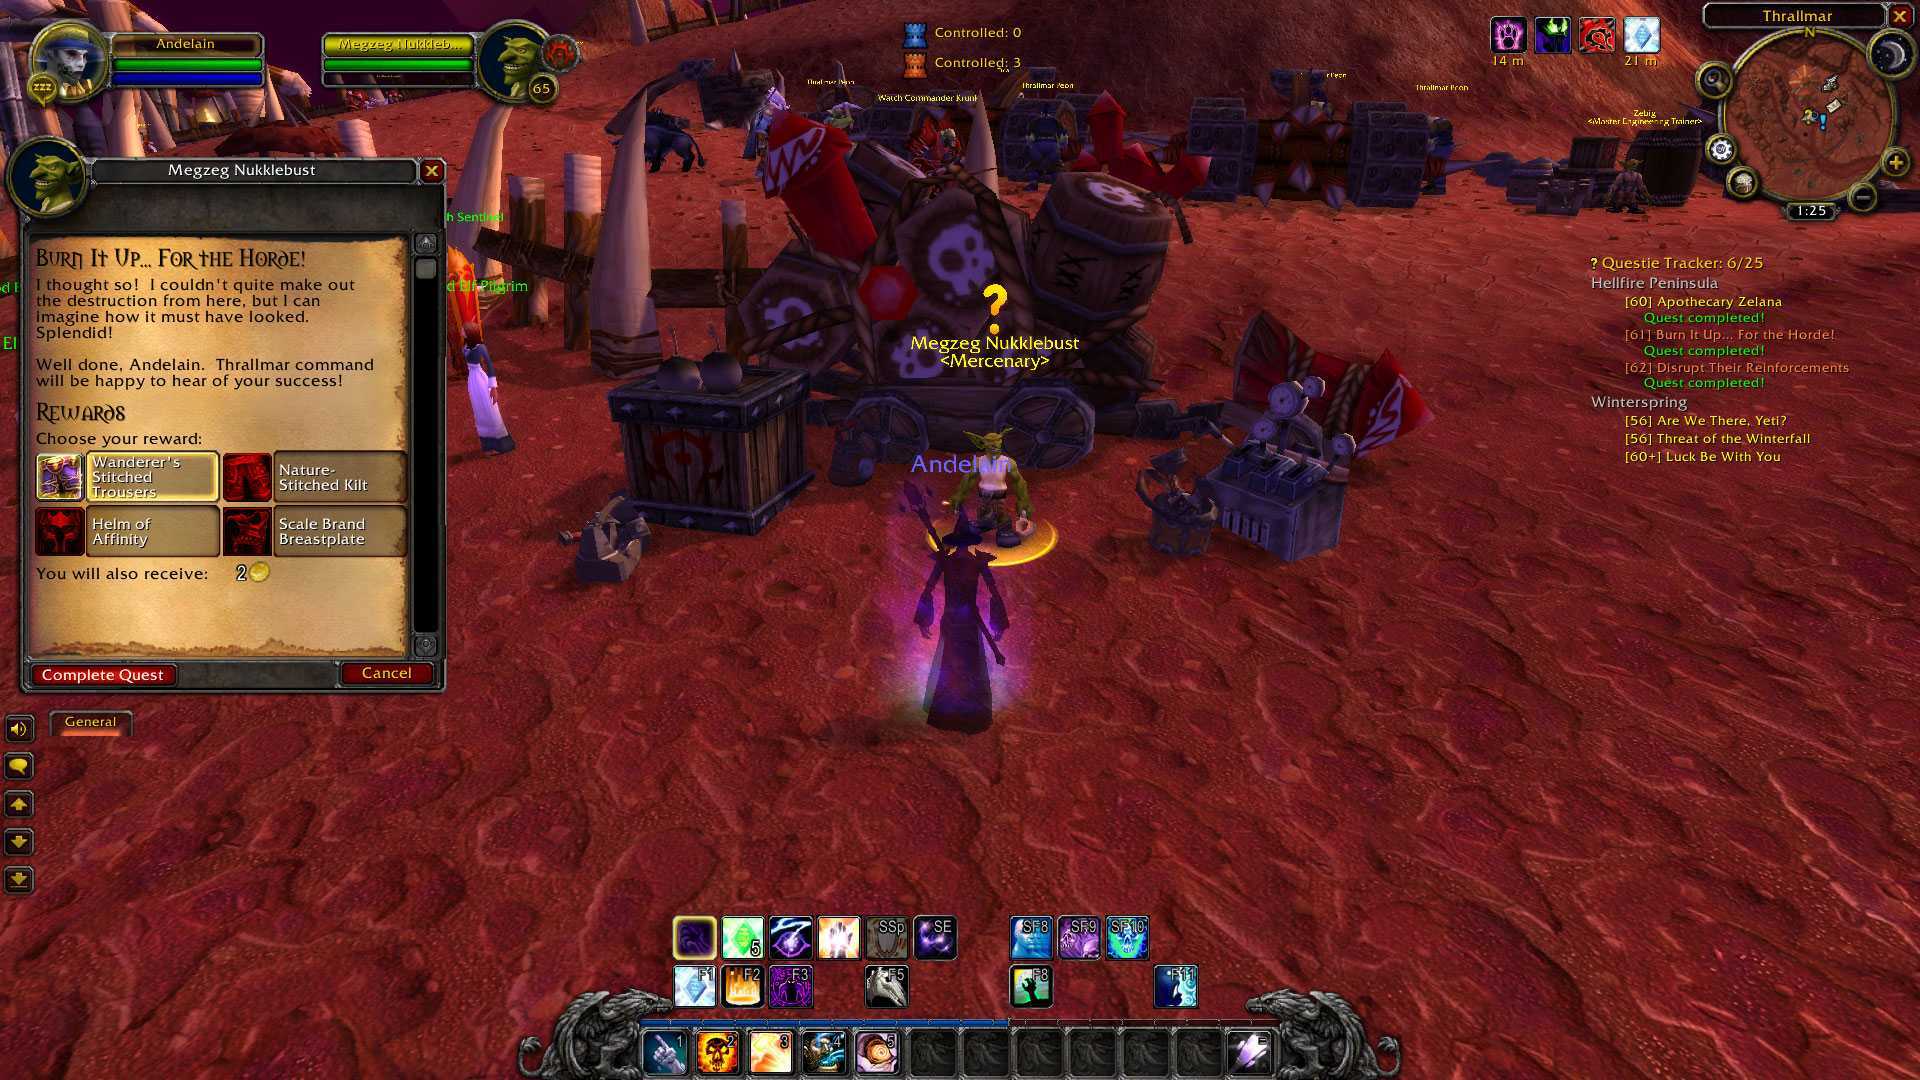 World of warcraft: burning crusade classic - wowpedia - your wiki guide to the world of warcraft